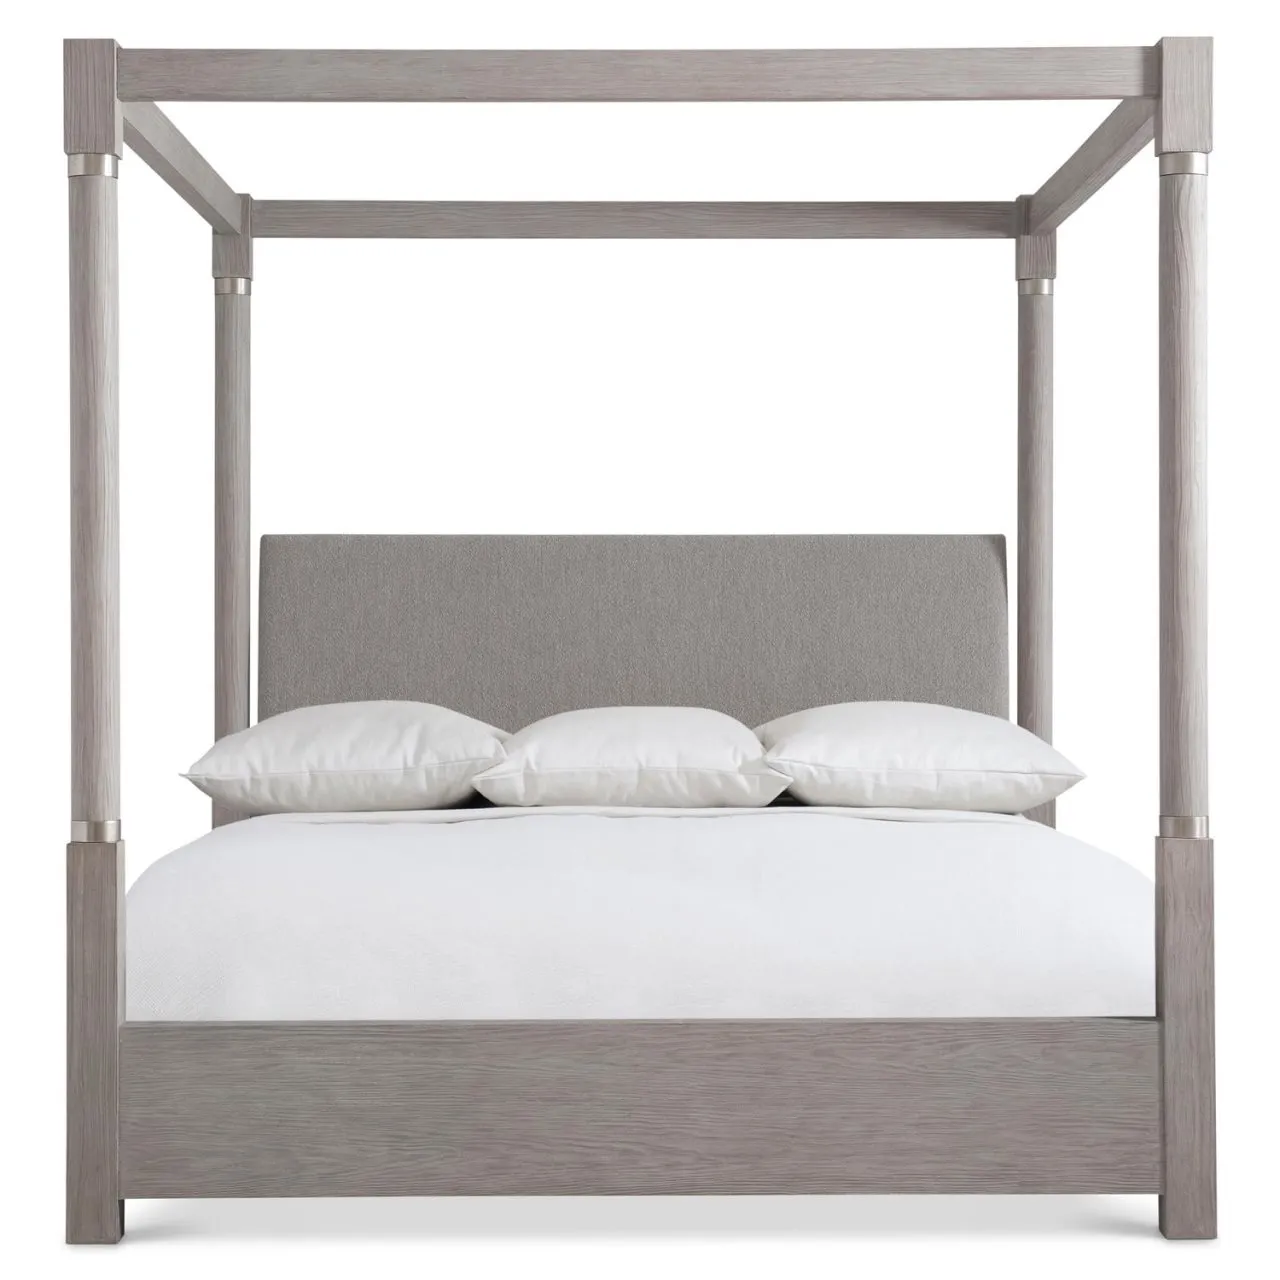 TRIANON CANOPY BED CALIFORNIA KING